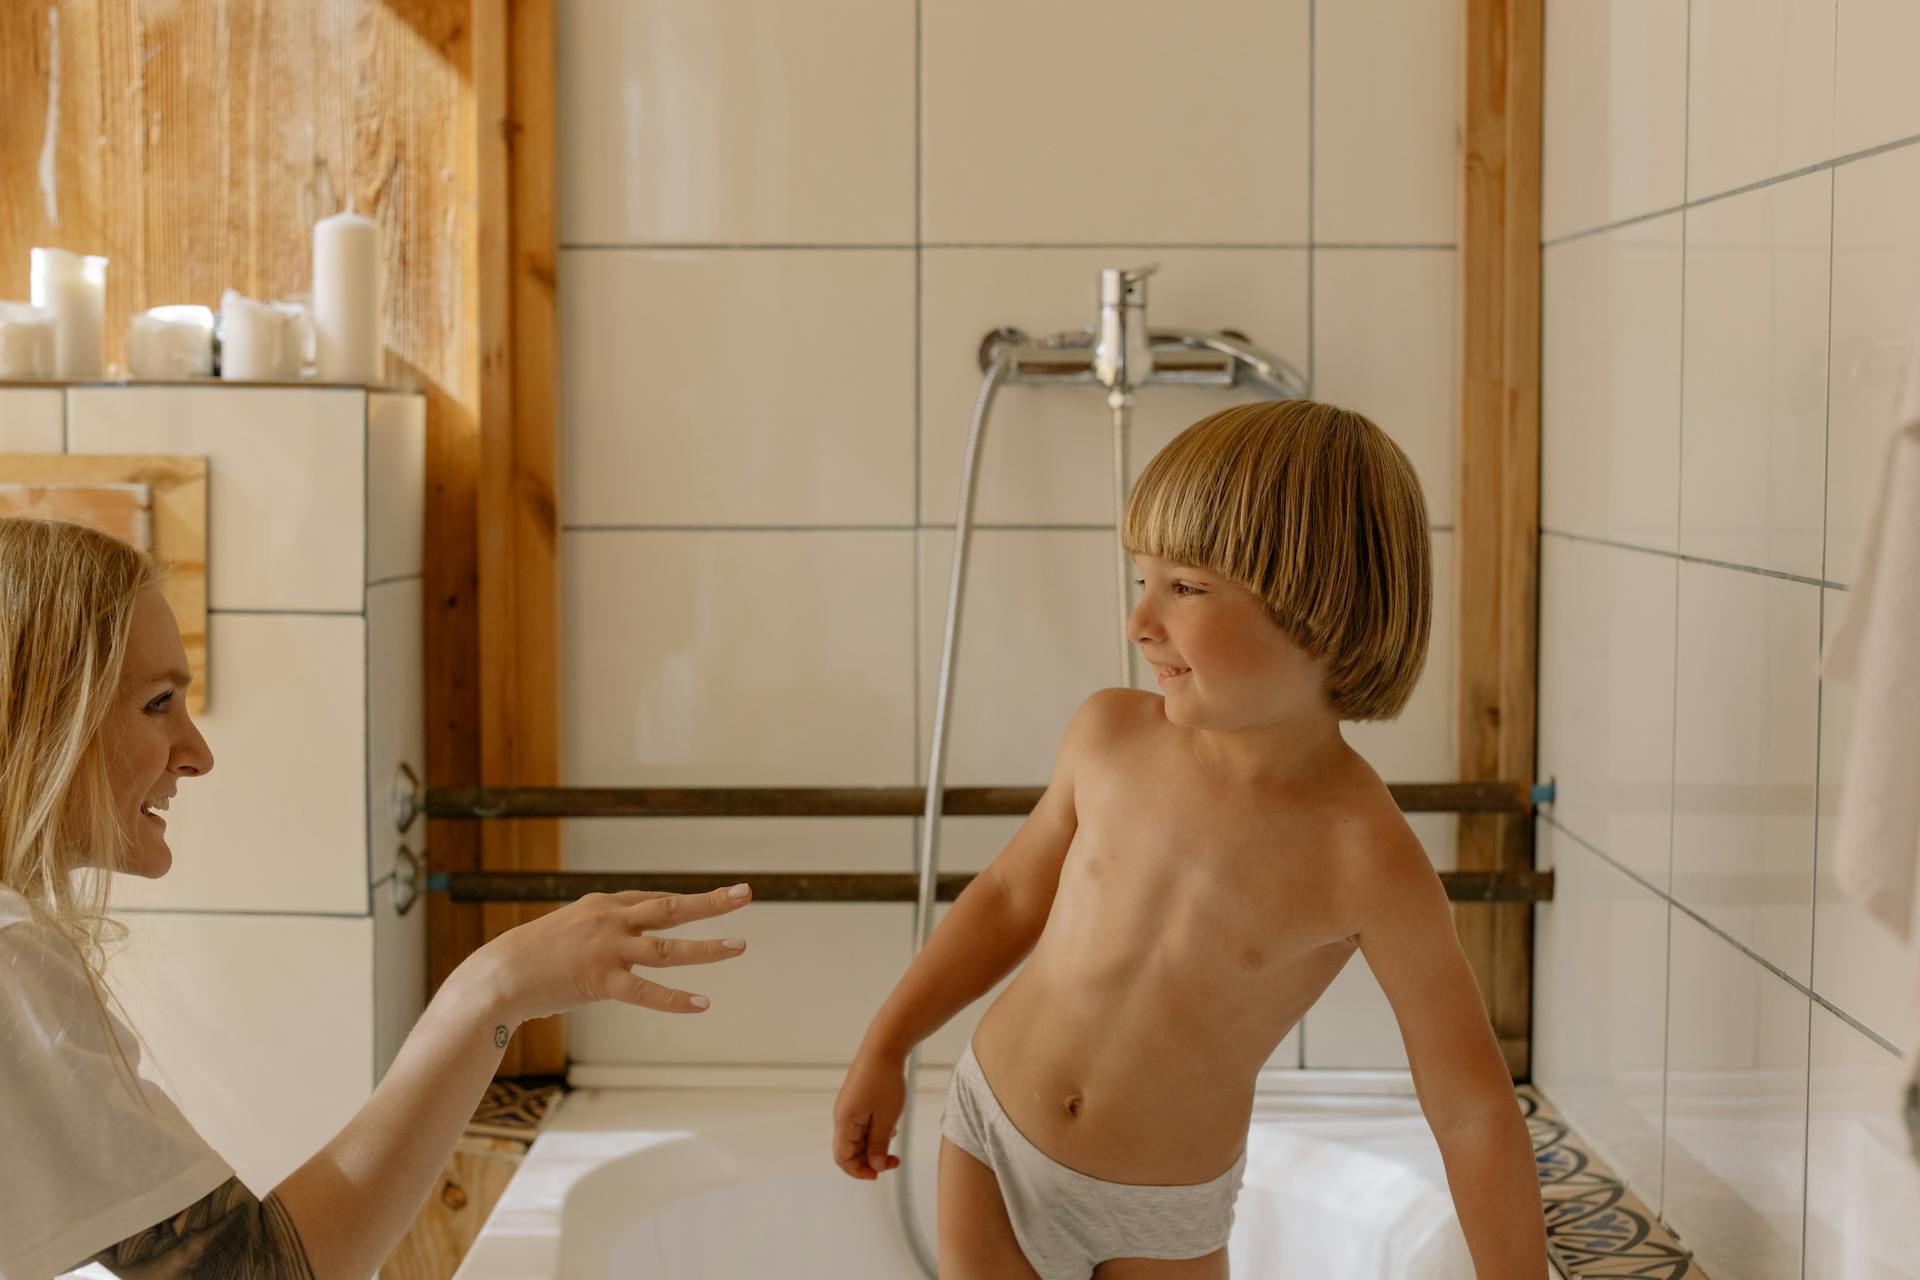 A mom with her son in the bathroom | Source: Pexels